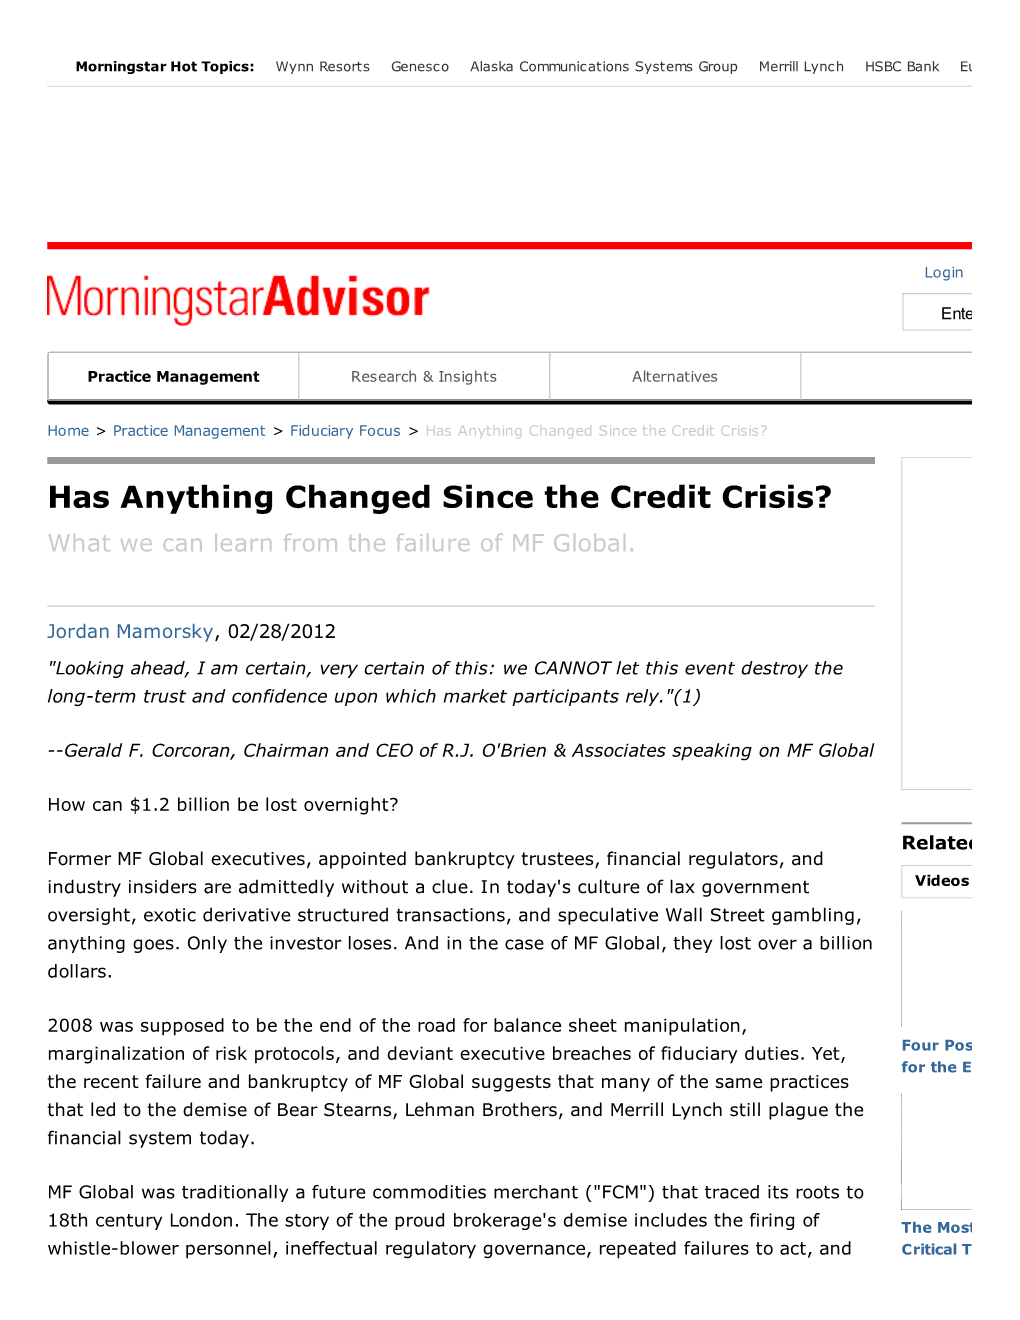 Has an Thing Changed Since the Credit Crisis?